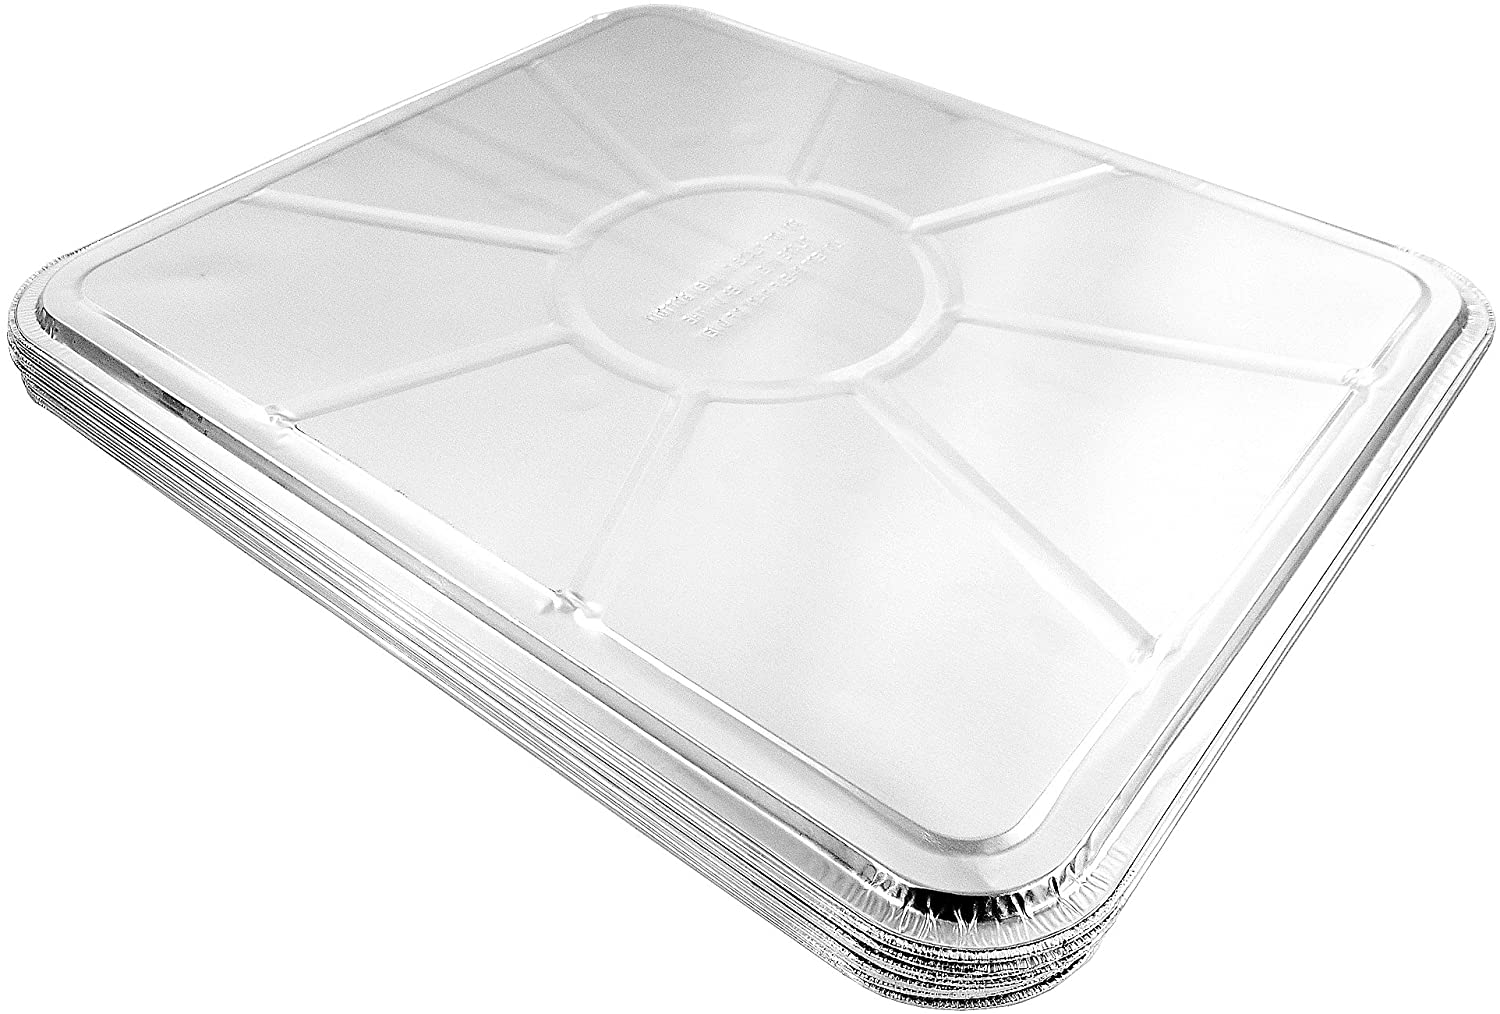 10-Pack Disposable Aluminum Liner 18 inch x 15 inch Foil Oven Tray Baking Sheet Pan Heat, Silver